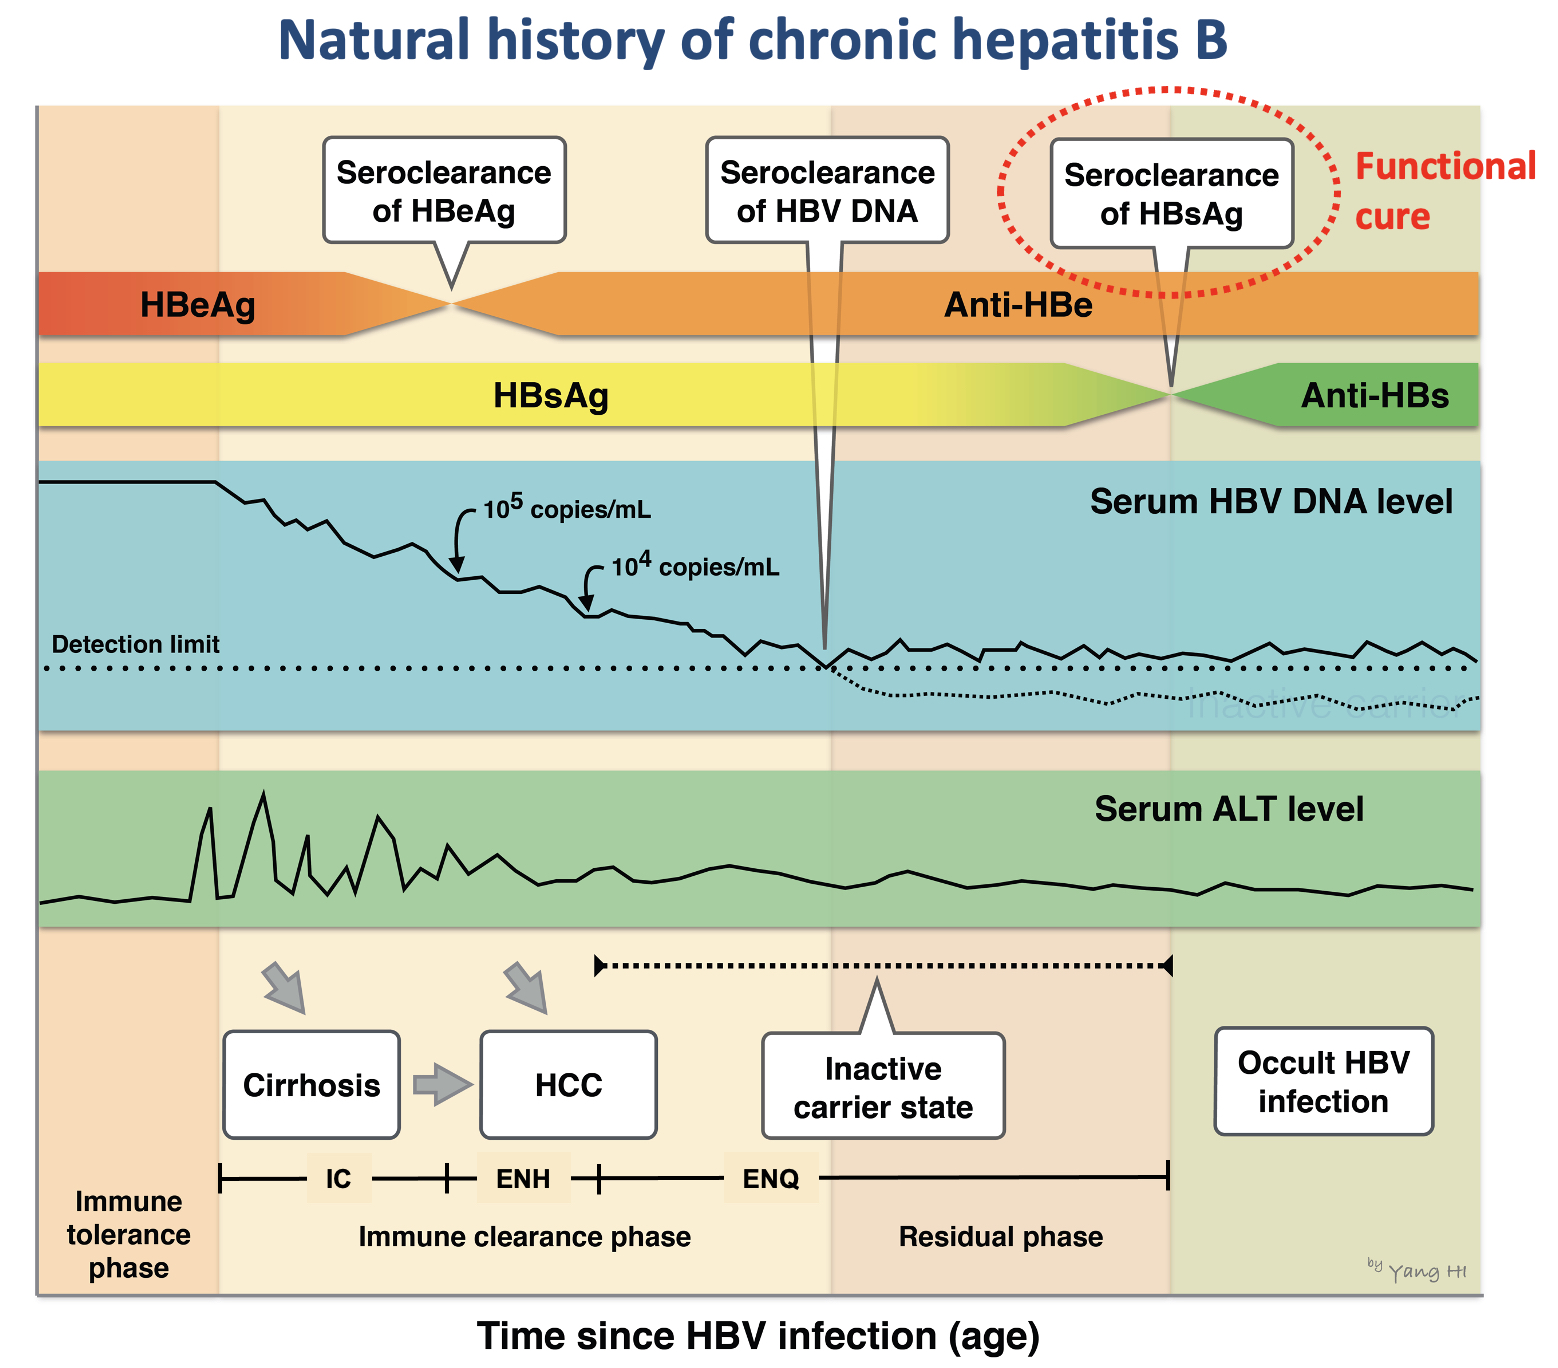 PD‐1 levels can predict spontaneous functional cure in inactive chronic hepatitis B carriers